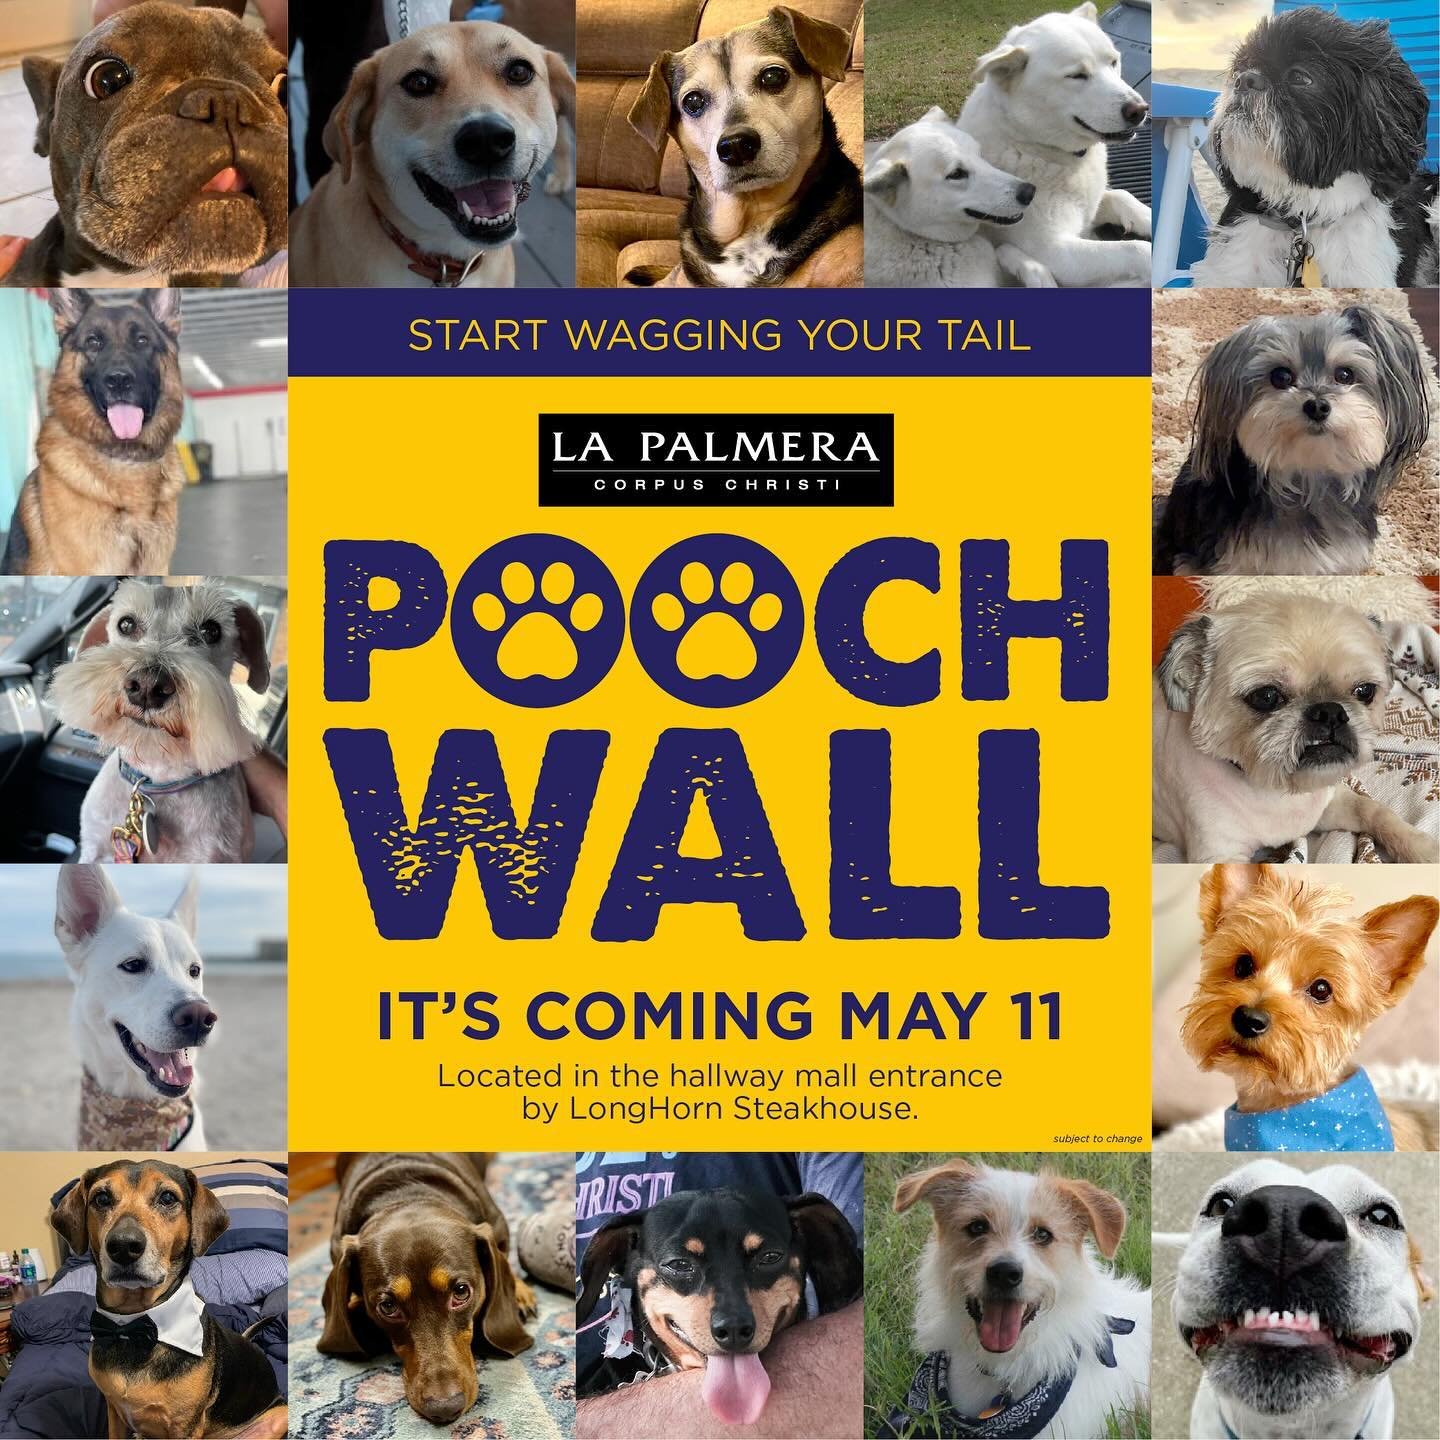 La Palmera&rsquo;s Pooch Wall is coming May 11th! With over 500 submissions, we need the pawfect wall to showcase all your pups. The wall will be located down the hallway of the LongHorn Steakhouse mall entrance. Stay tuned for details! #poochwall #a